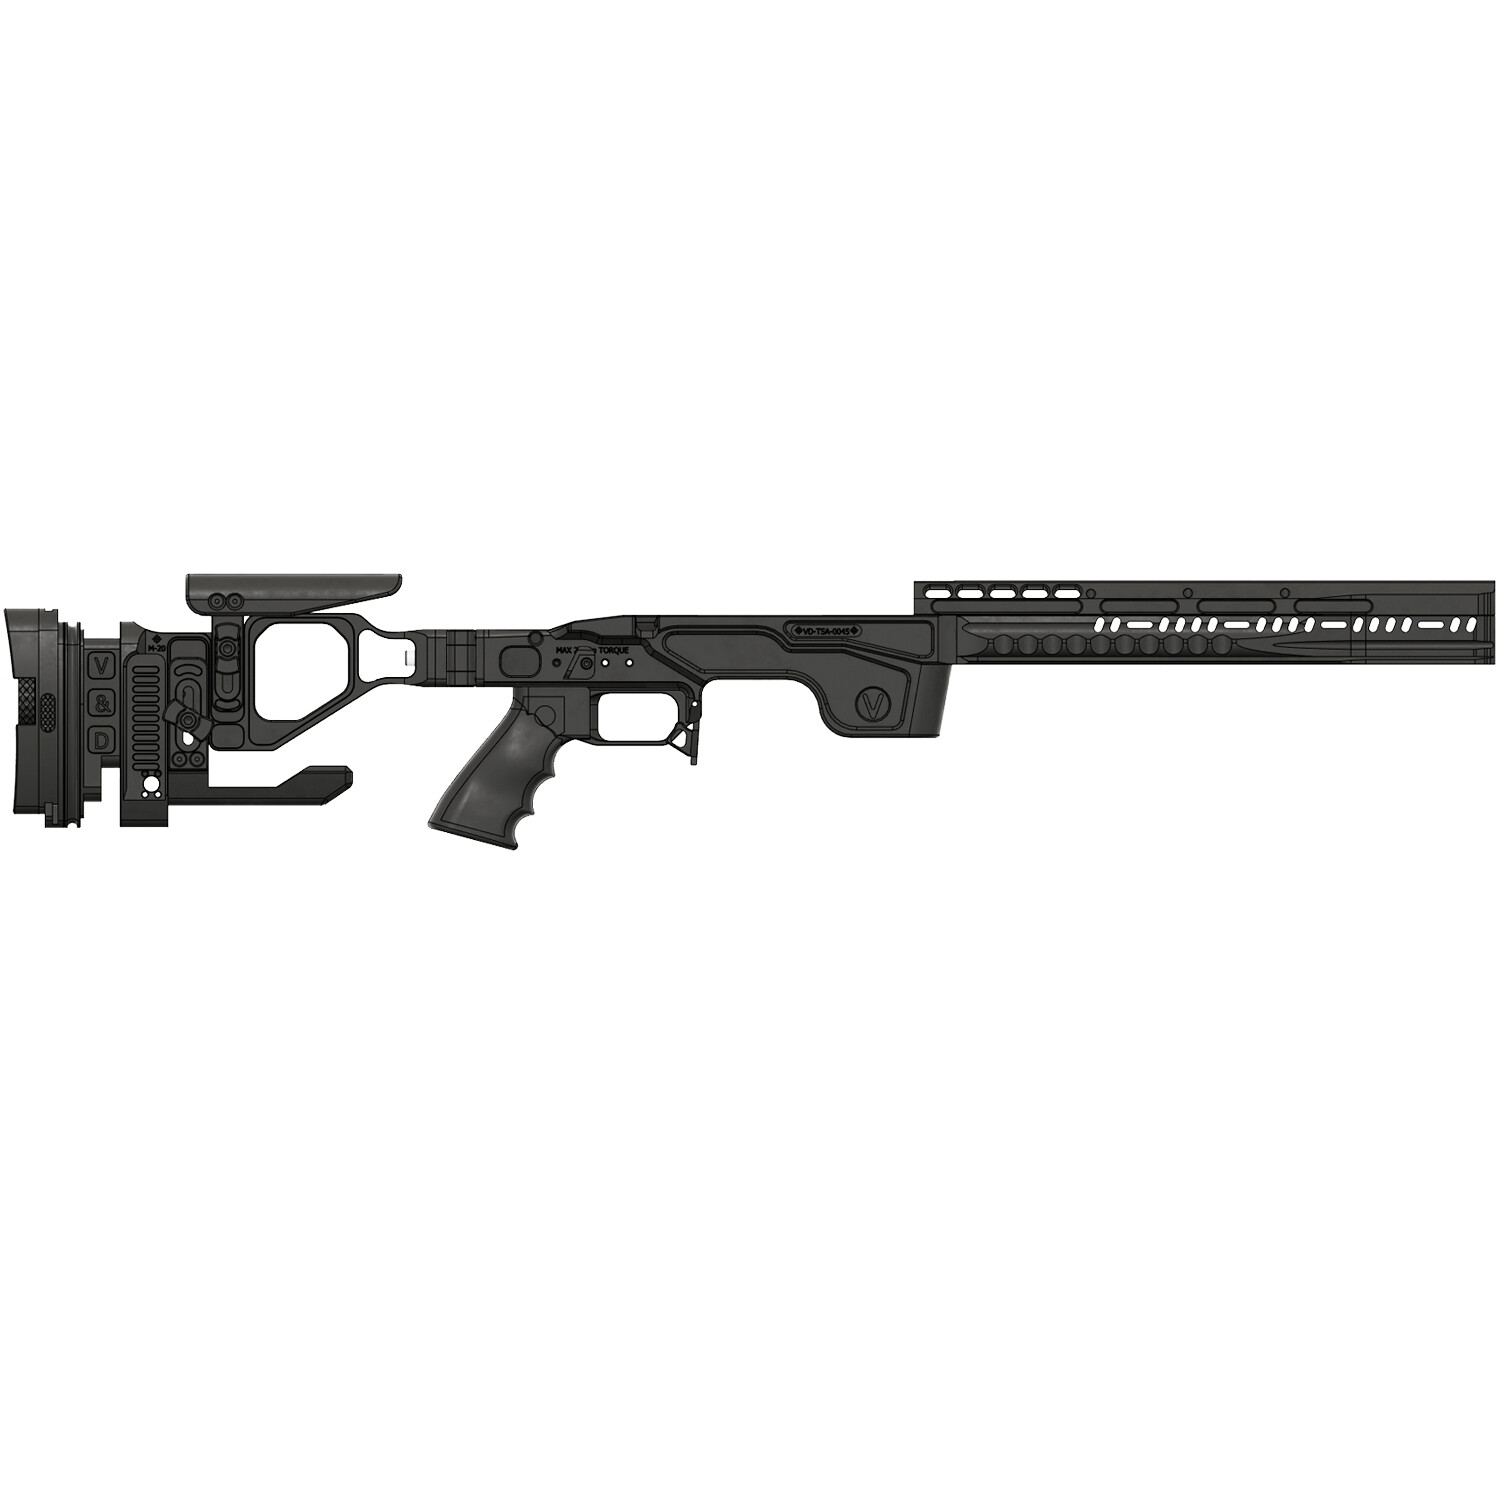 Vision & Design Chassis for Remington 700 L/A with Flat Top Frontguard